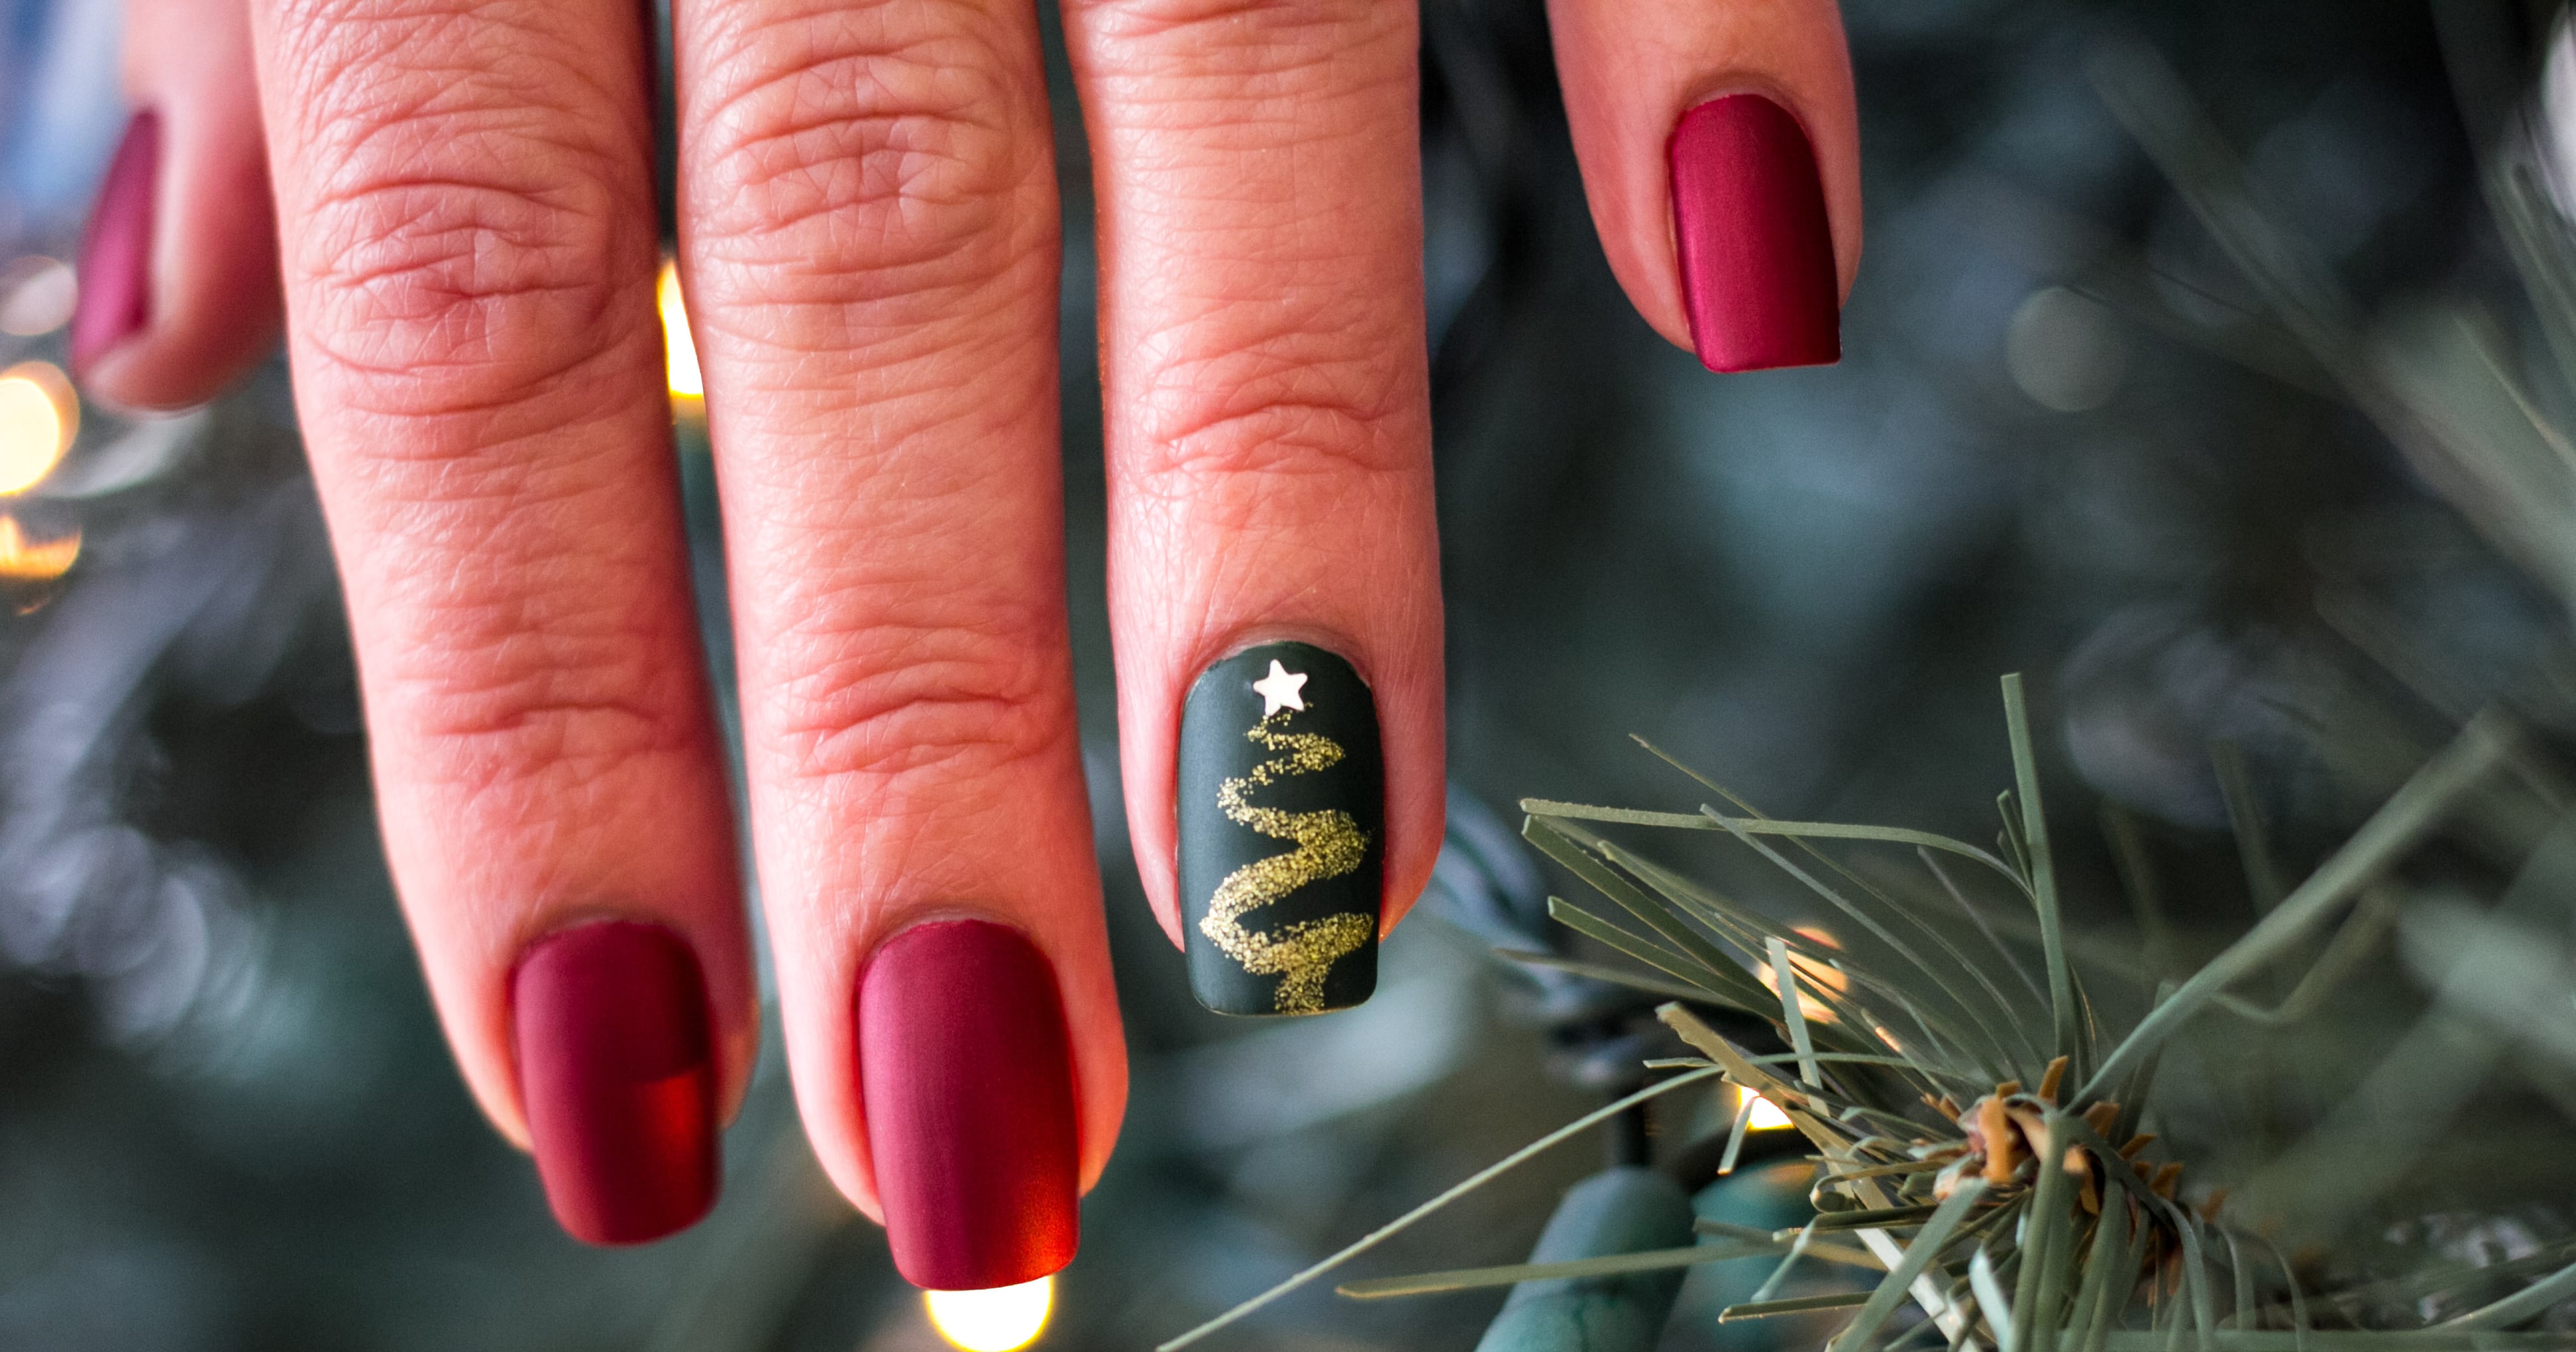 7 Nail Art Ideas To Try At-Home